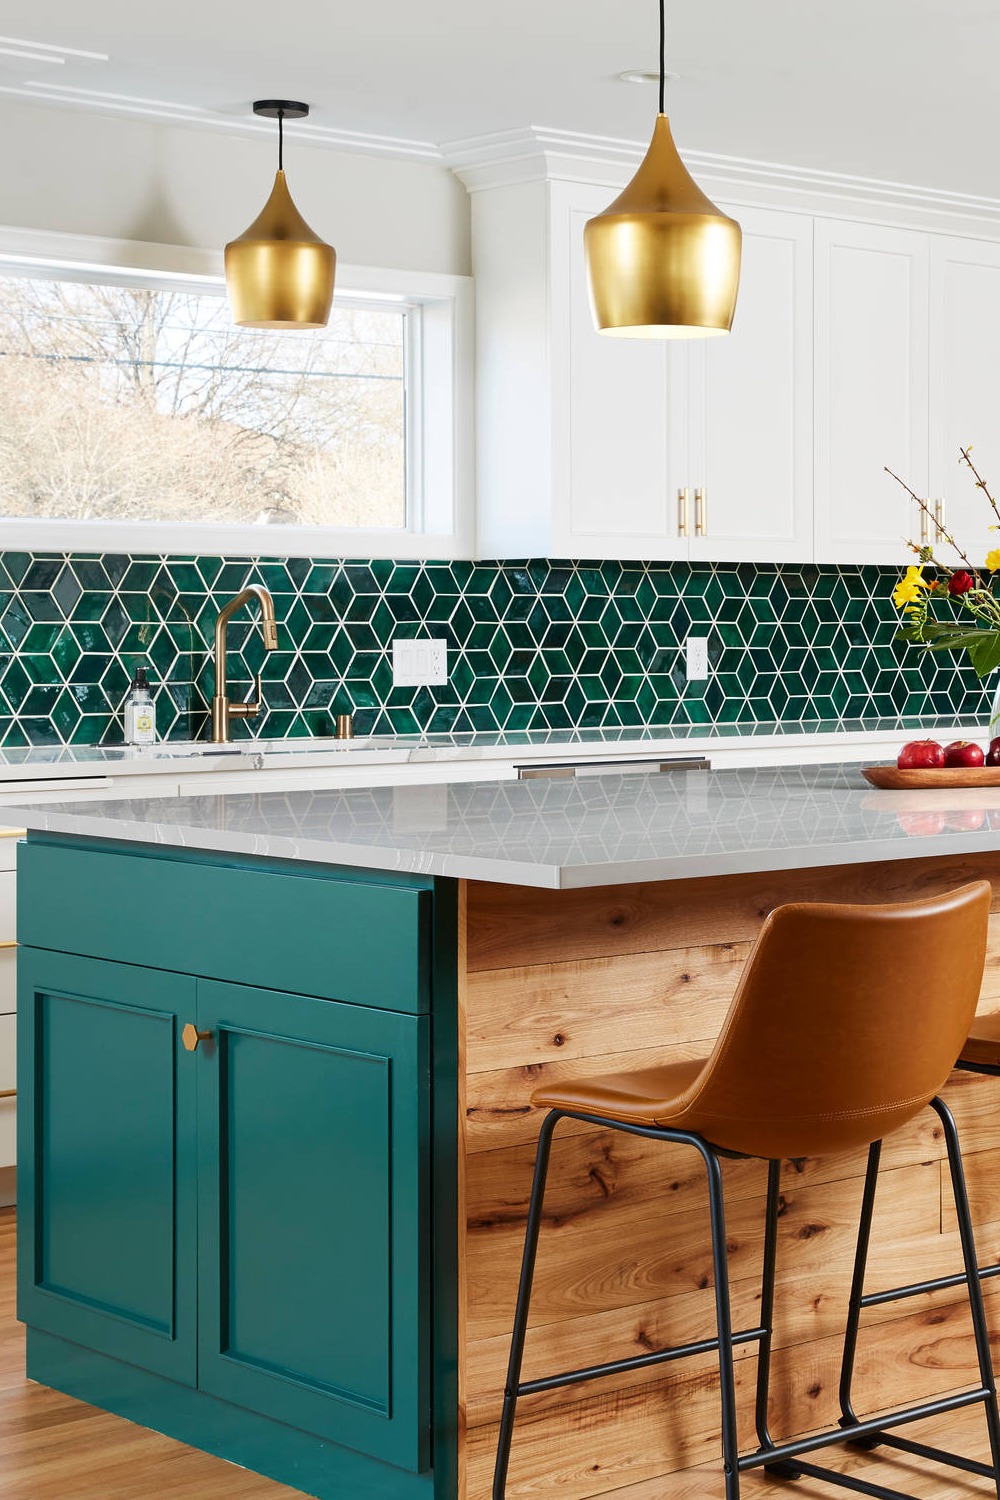 Green Tiles Kitchen Cabinetry Wood Panel Room Style Create Texture Walls Warm